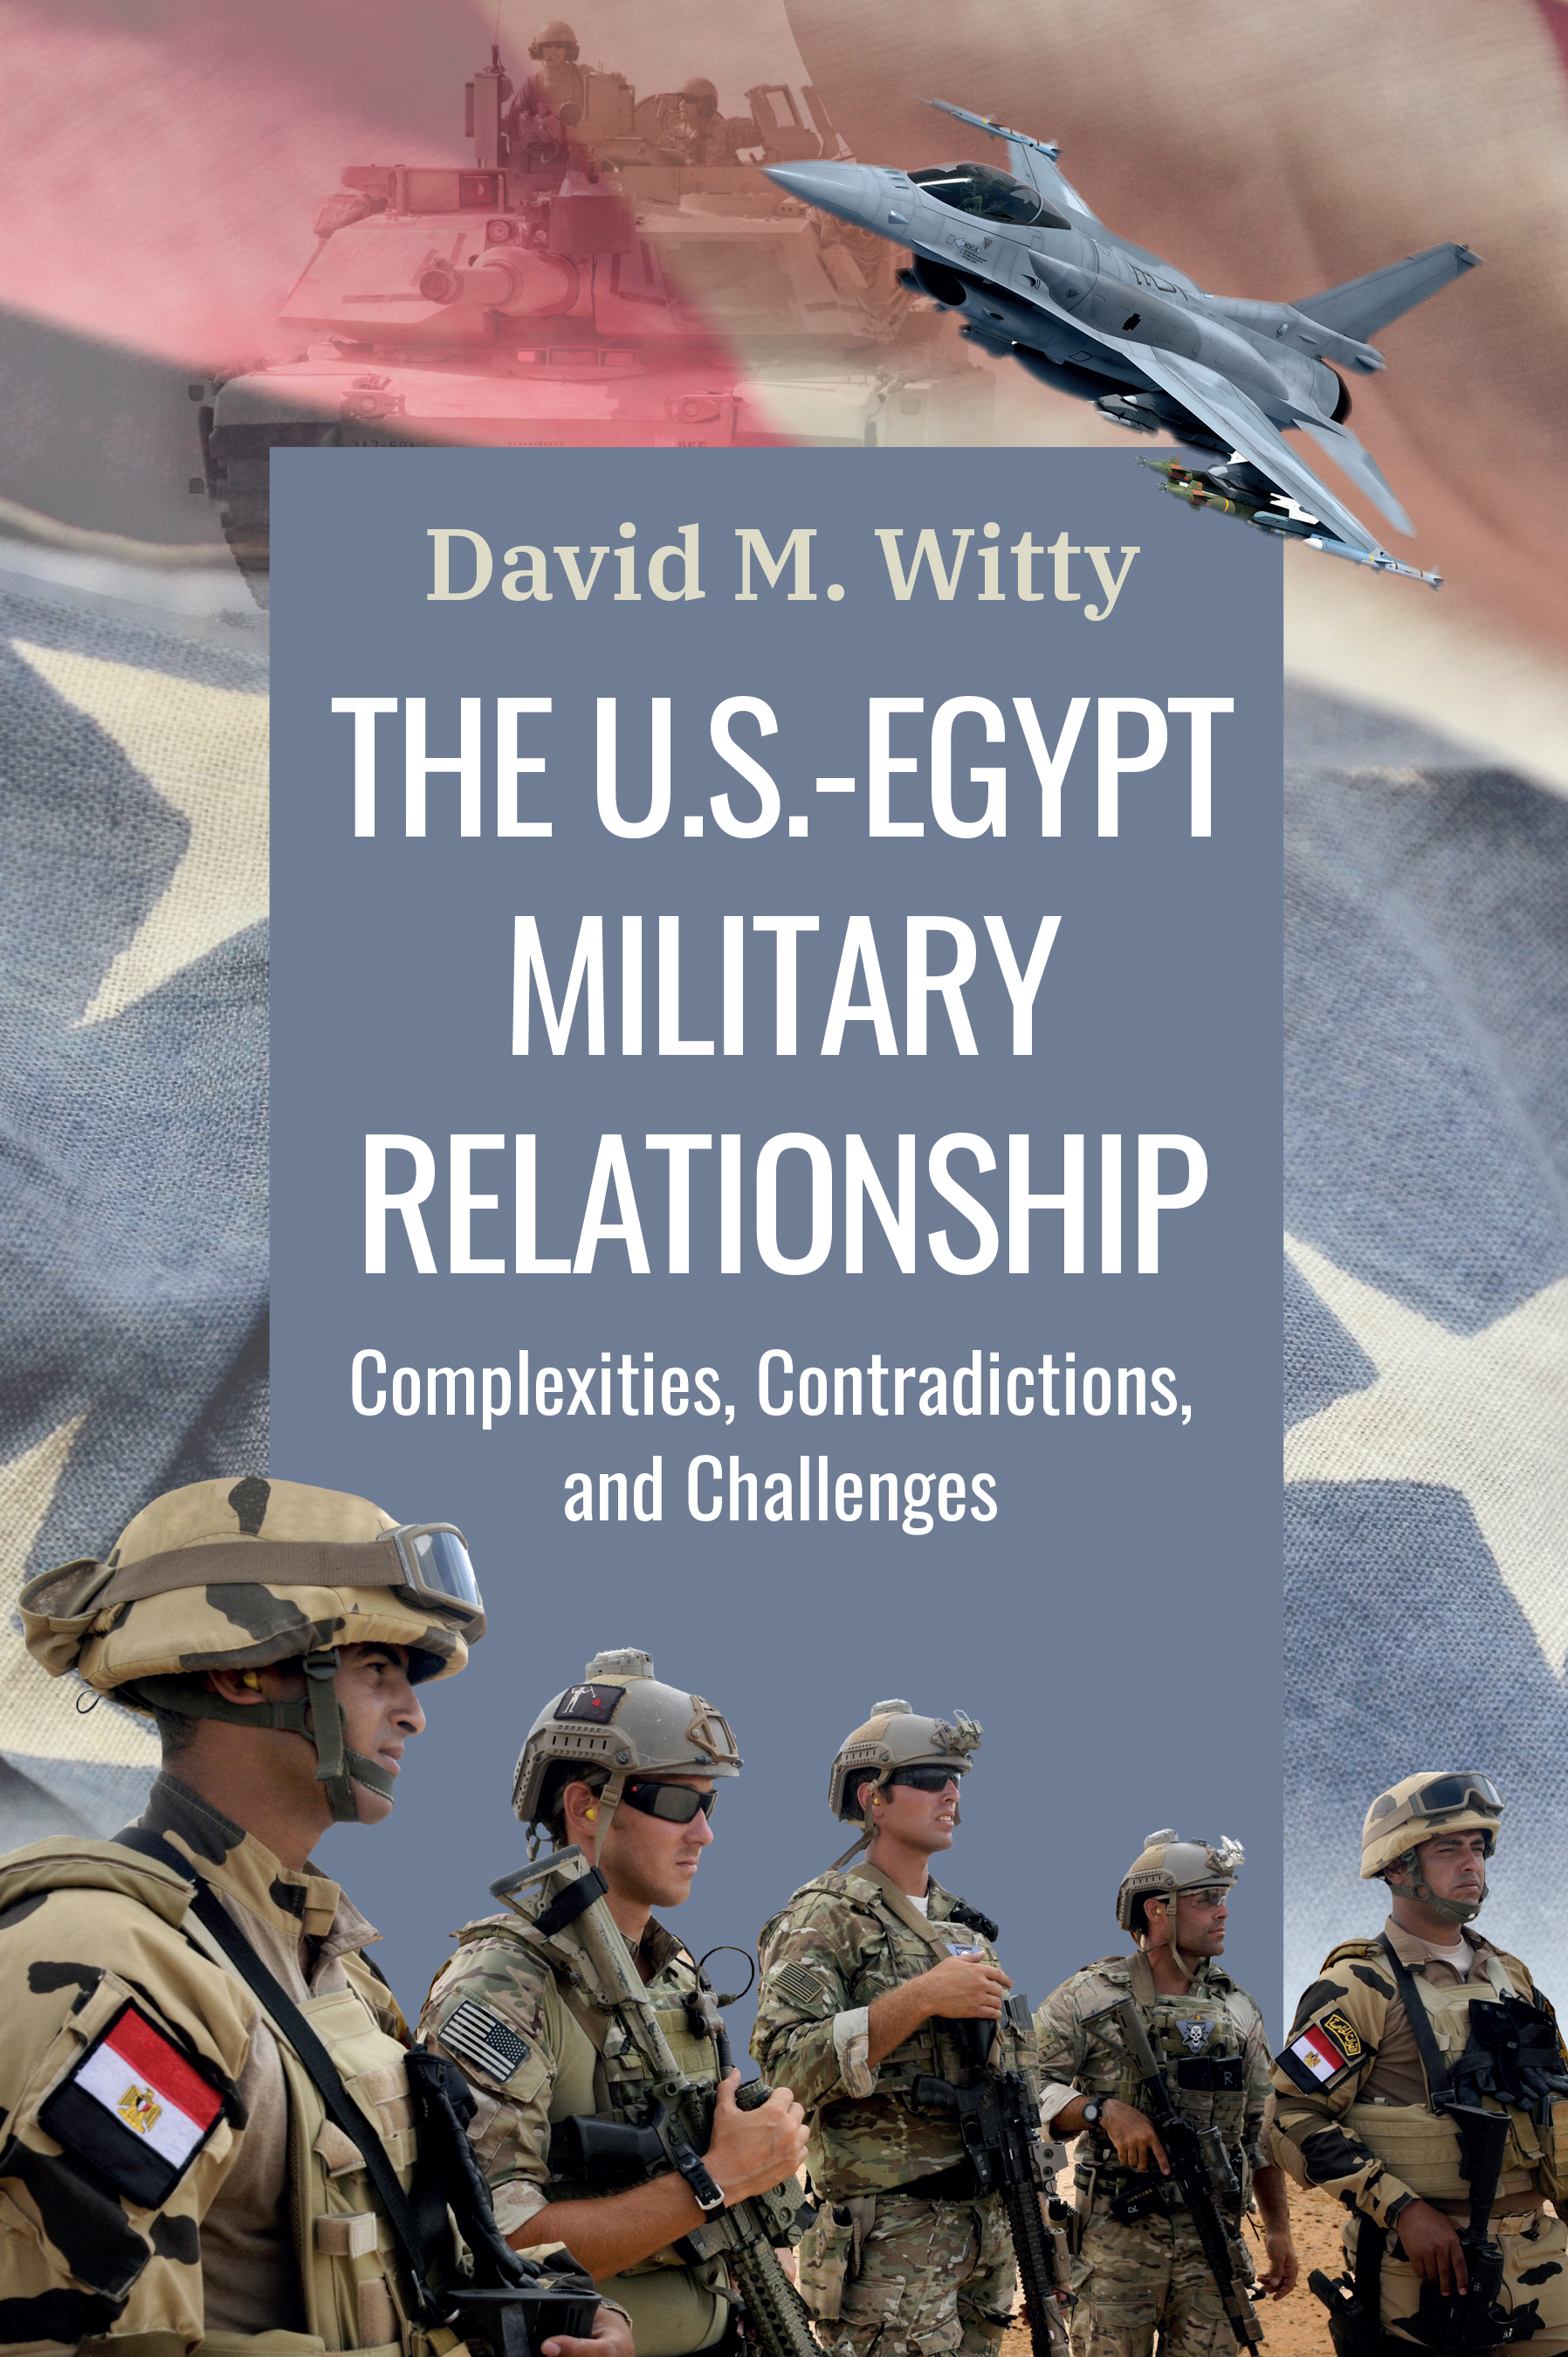 The U.S.-Egypt Military Relationship: Complexities, Contradictions, and Challenges